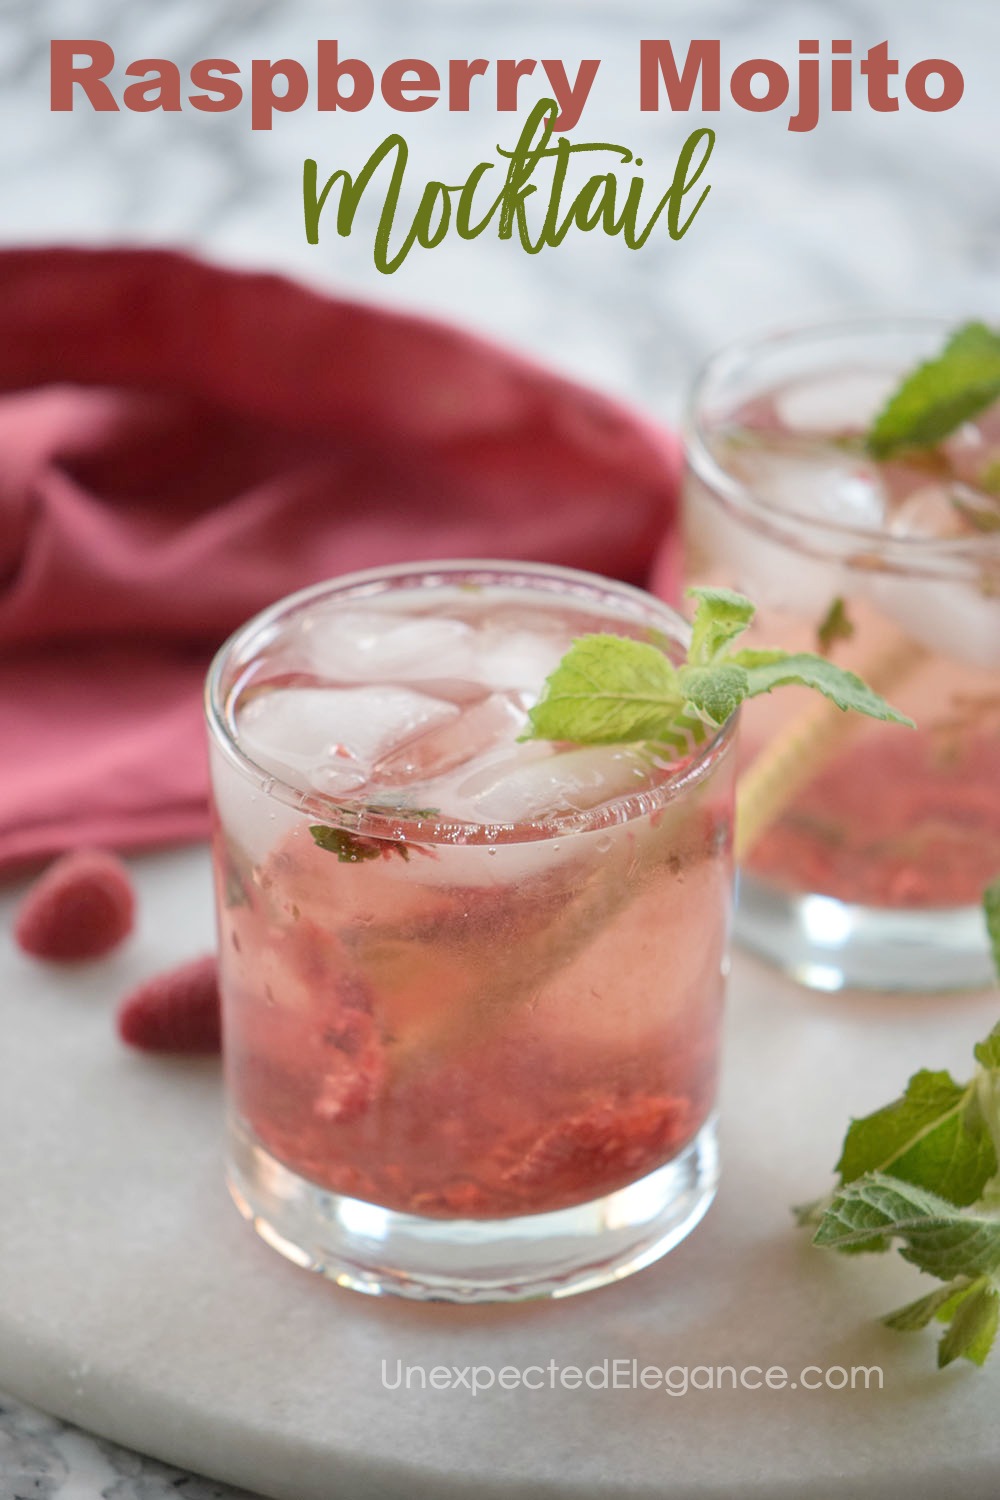 For your next party, make sure you have a non-alcoholic drink available for your guests and give this Raspberry Mojito Mocktail a try!